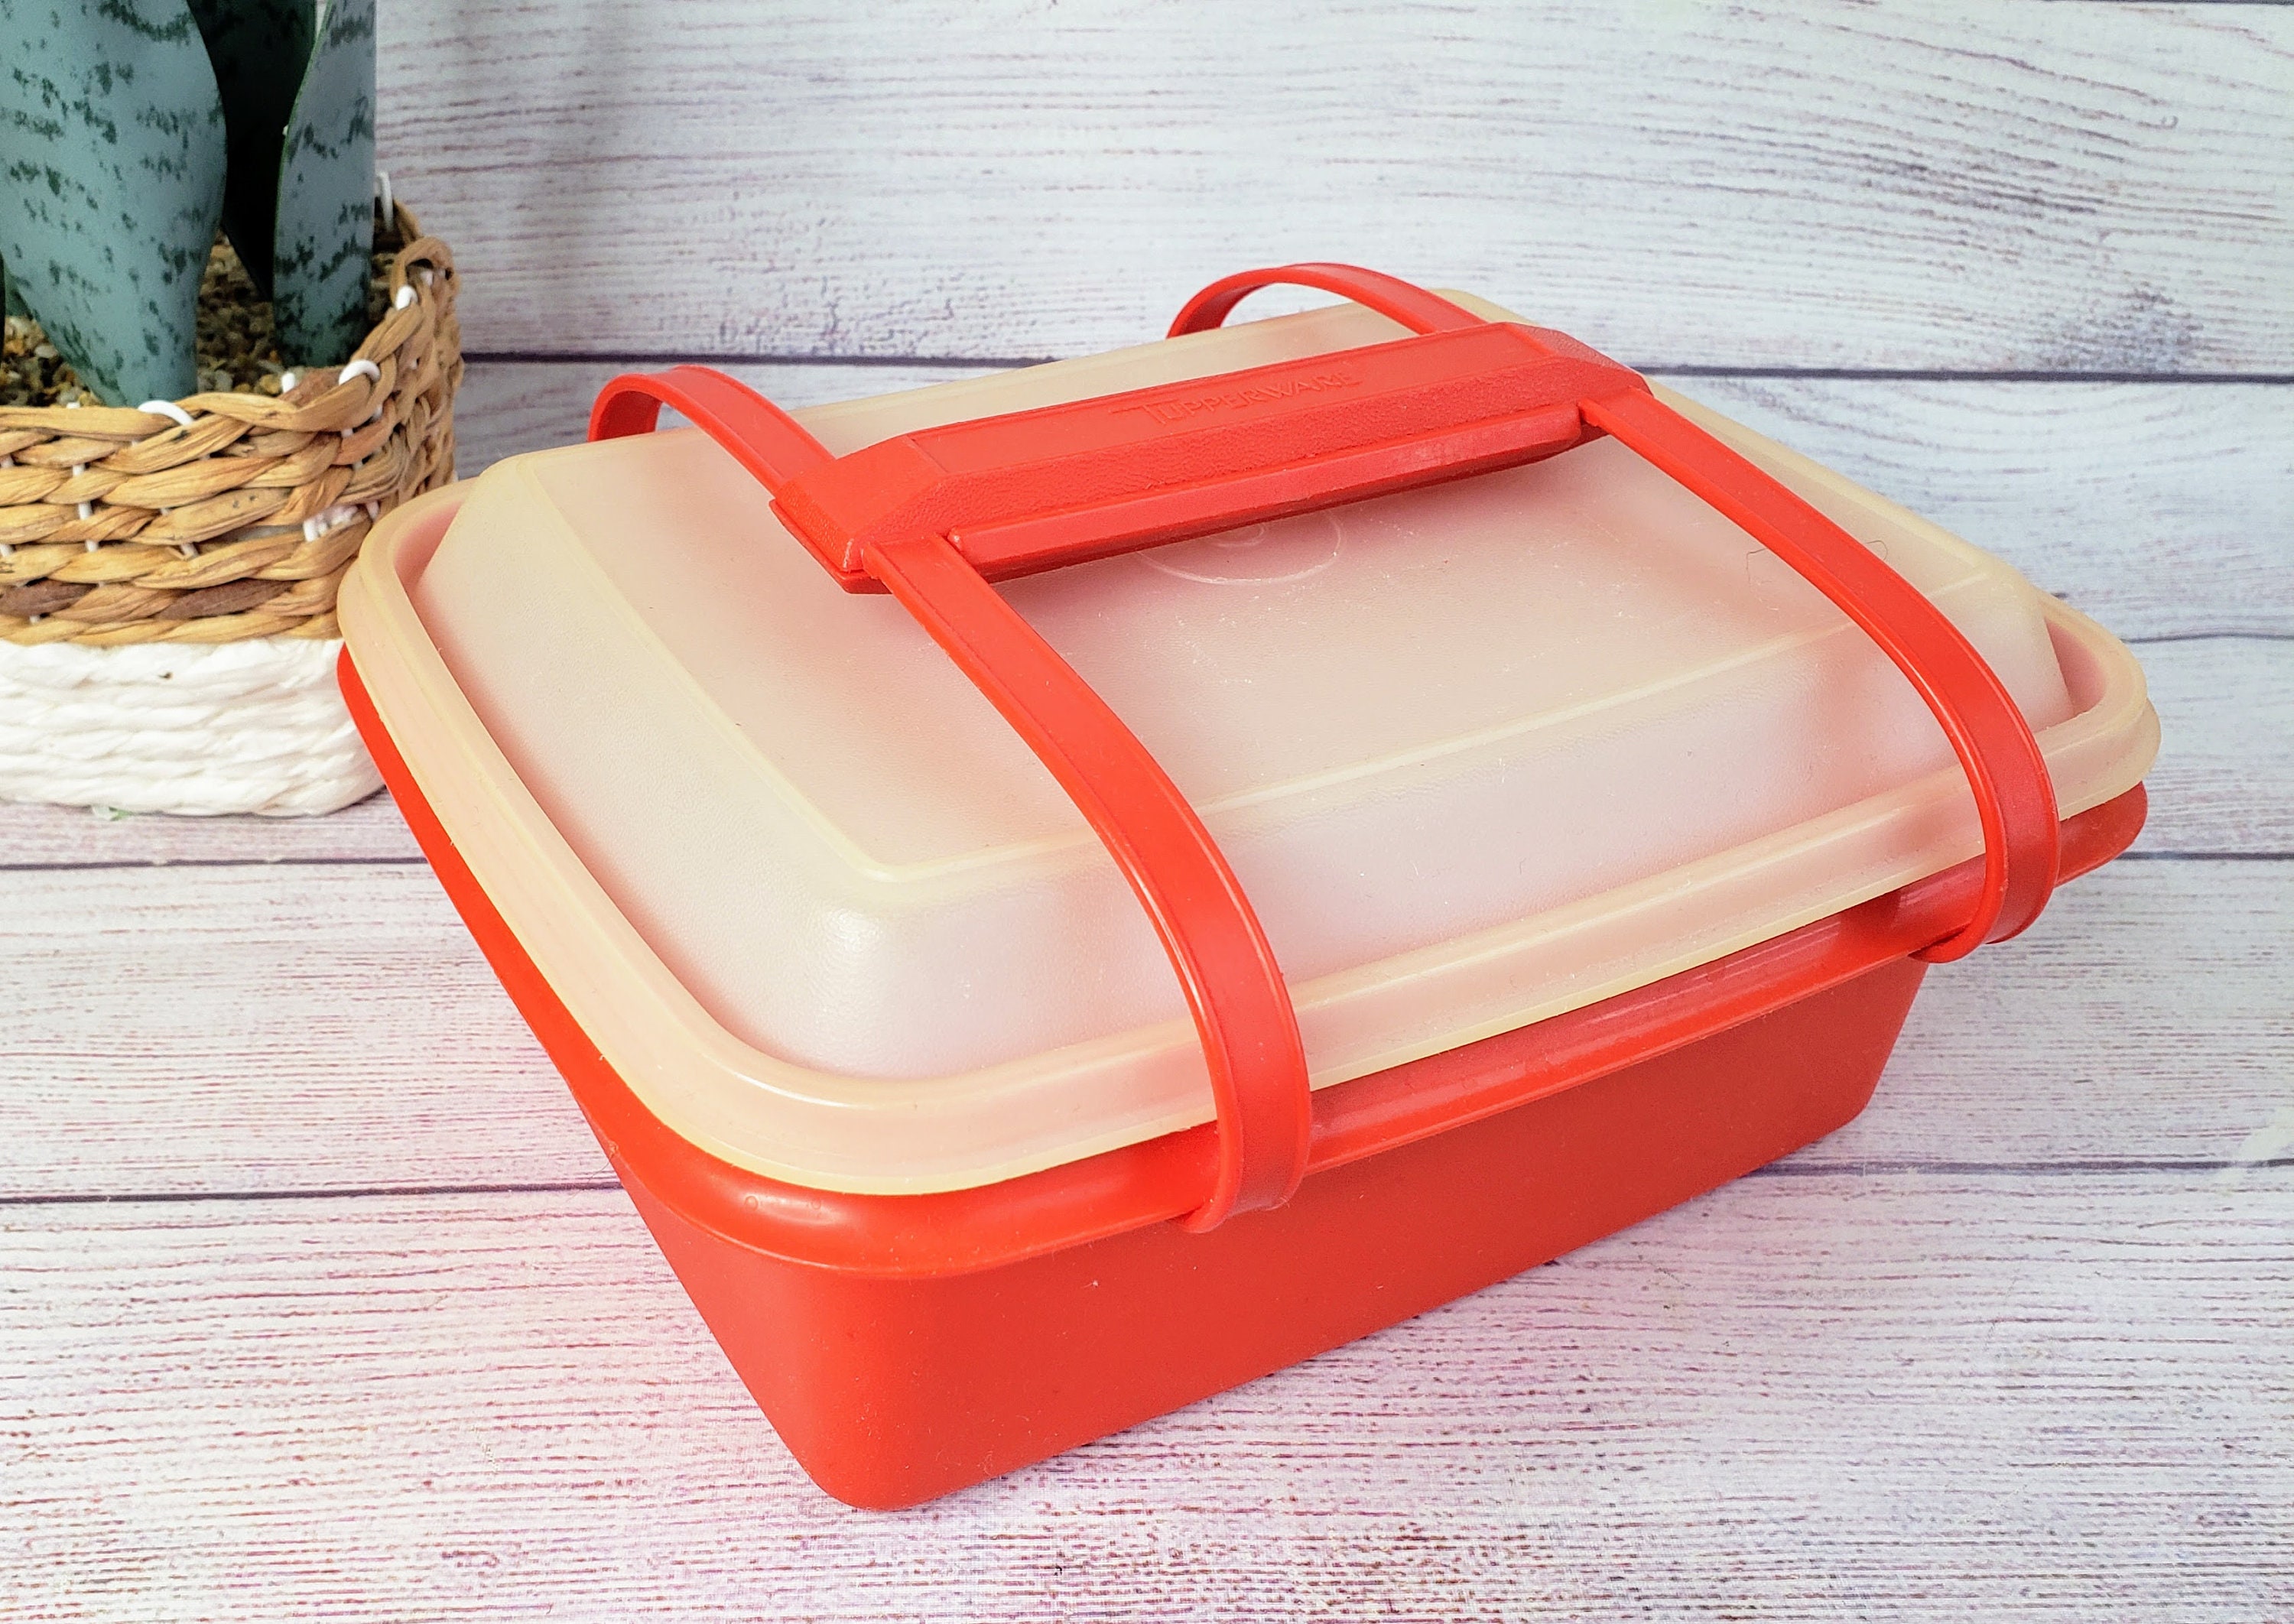 Tupperware Sandwich Keeper, lunch box with clip closure, VINTAGE TUPPERWARE